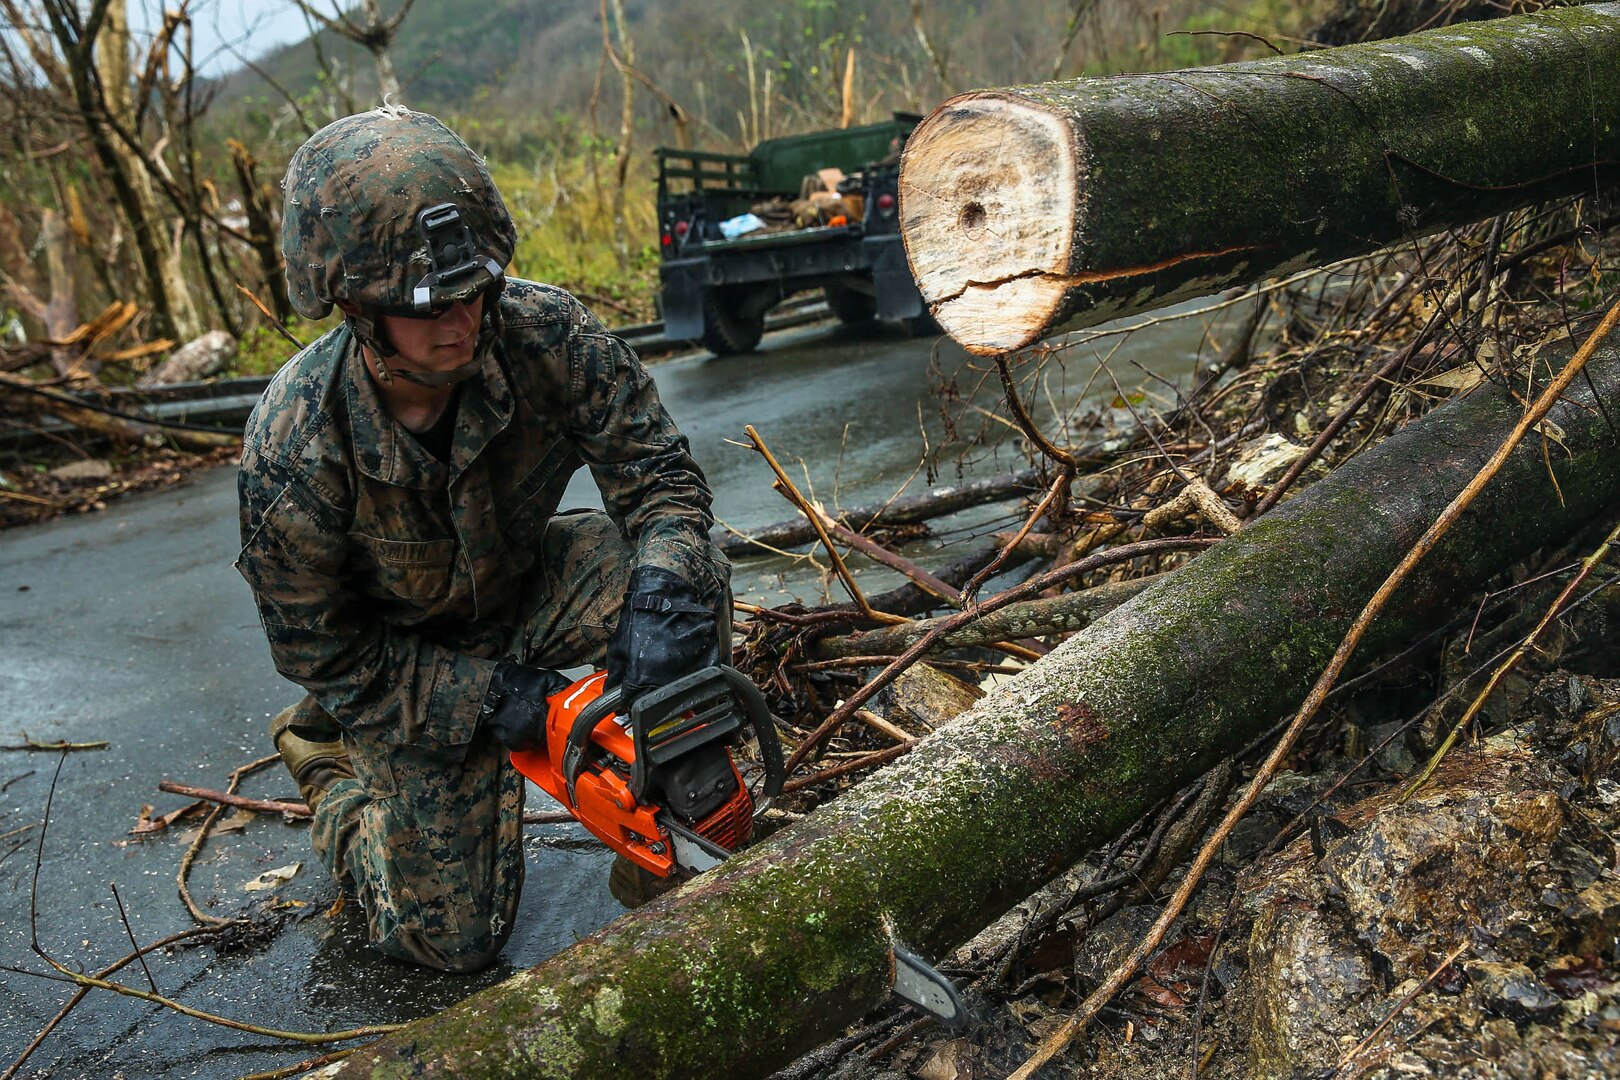 U.S. Marine Corps Sgt. Patrick J. Smith, a combat engineer with Battalion Landing Team 2nd Battalion, 6th Marine Regiment, 26th Marine Expeditionary Unit (MEU), uses a chainsaw to cut through a tree during road clearance operations in Ponce, Puerto Rico, Oct. 9, 2017.